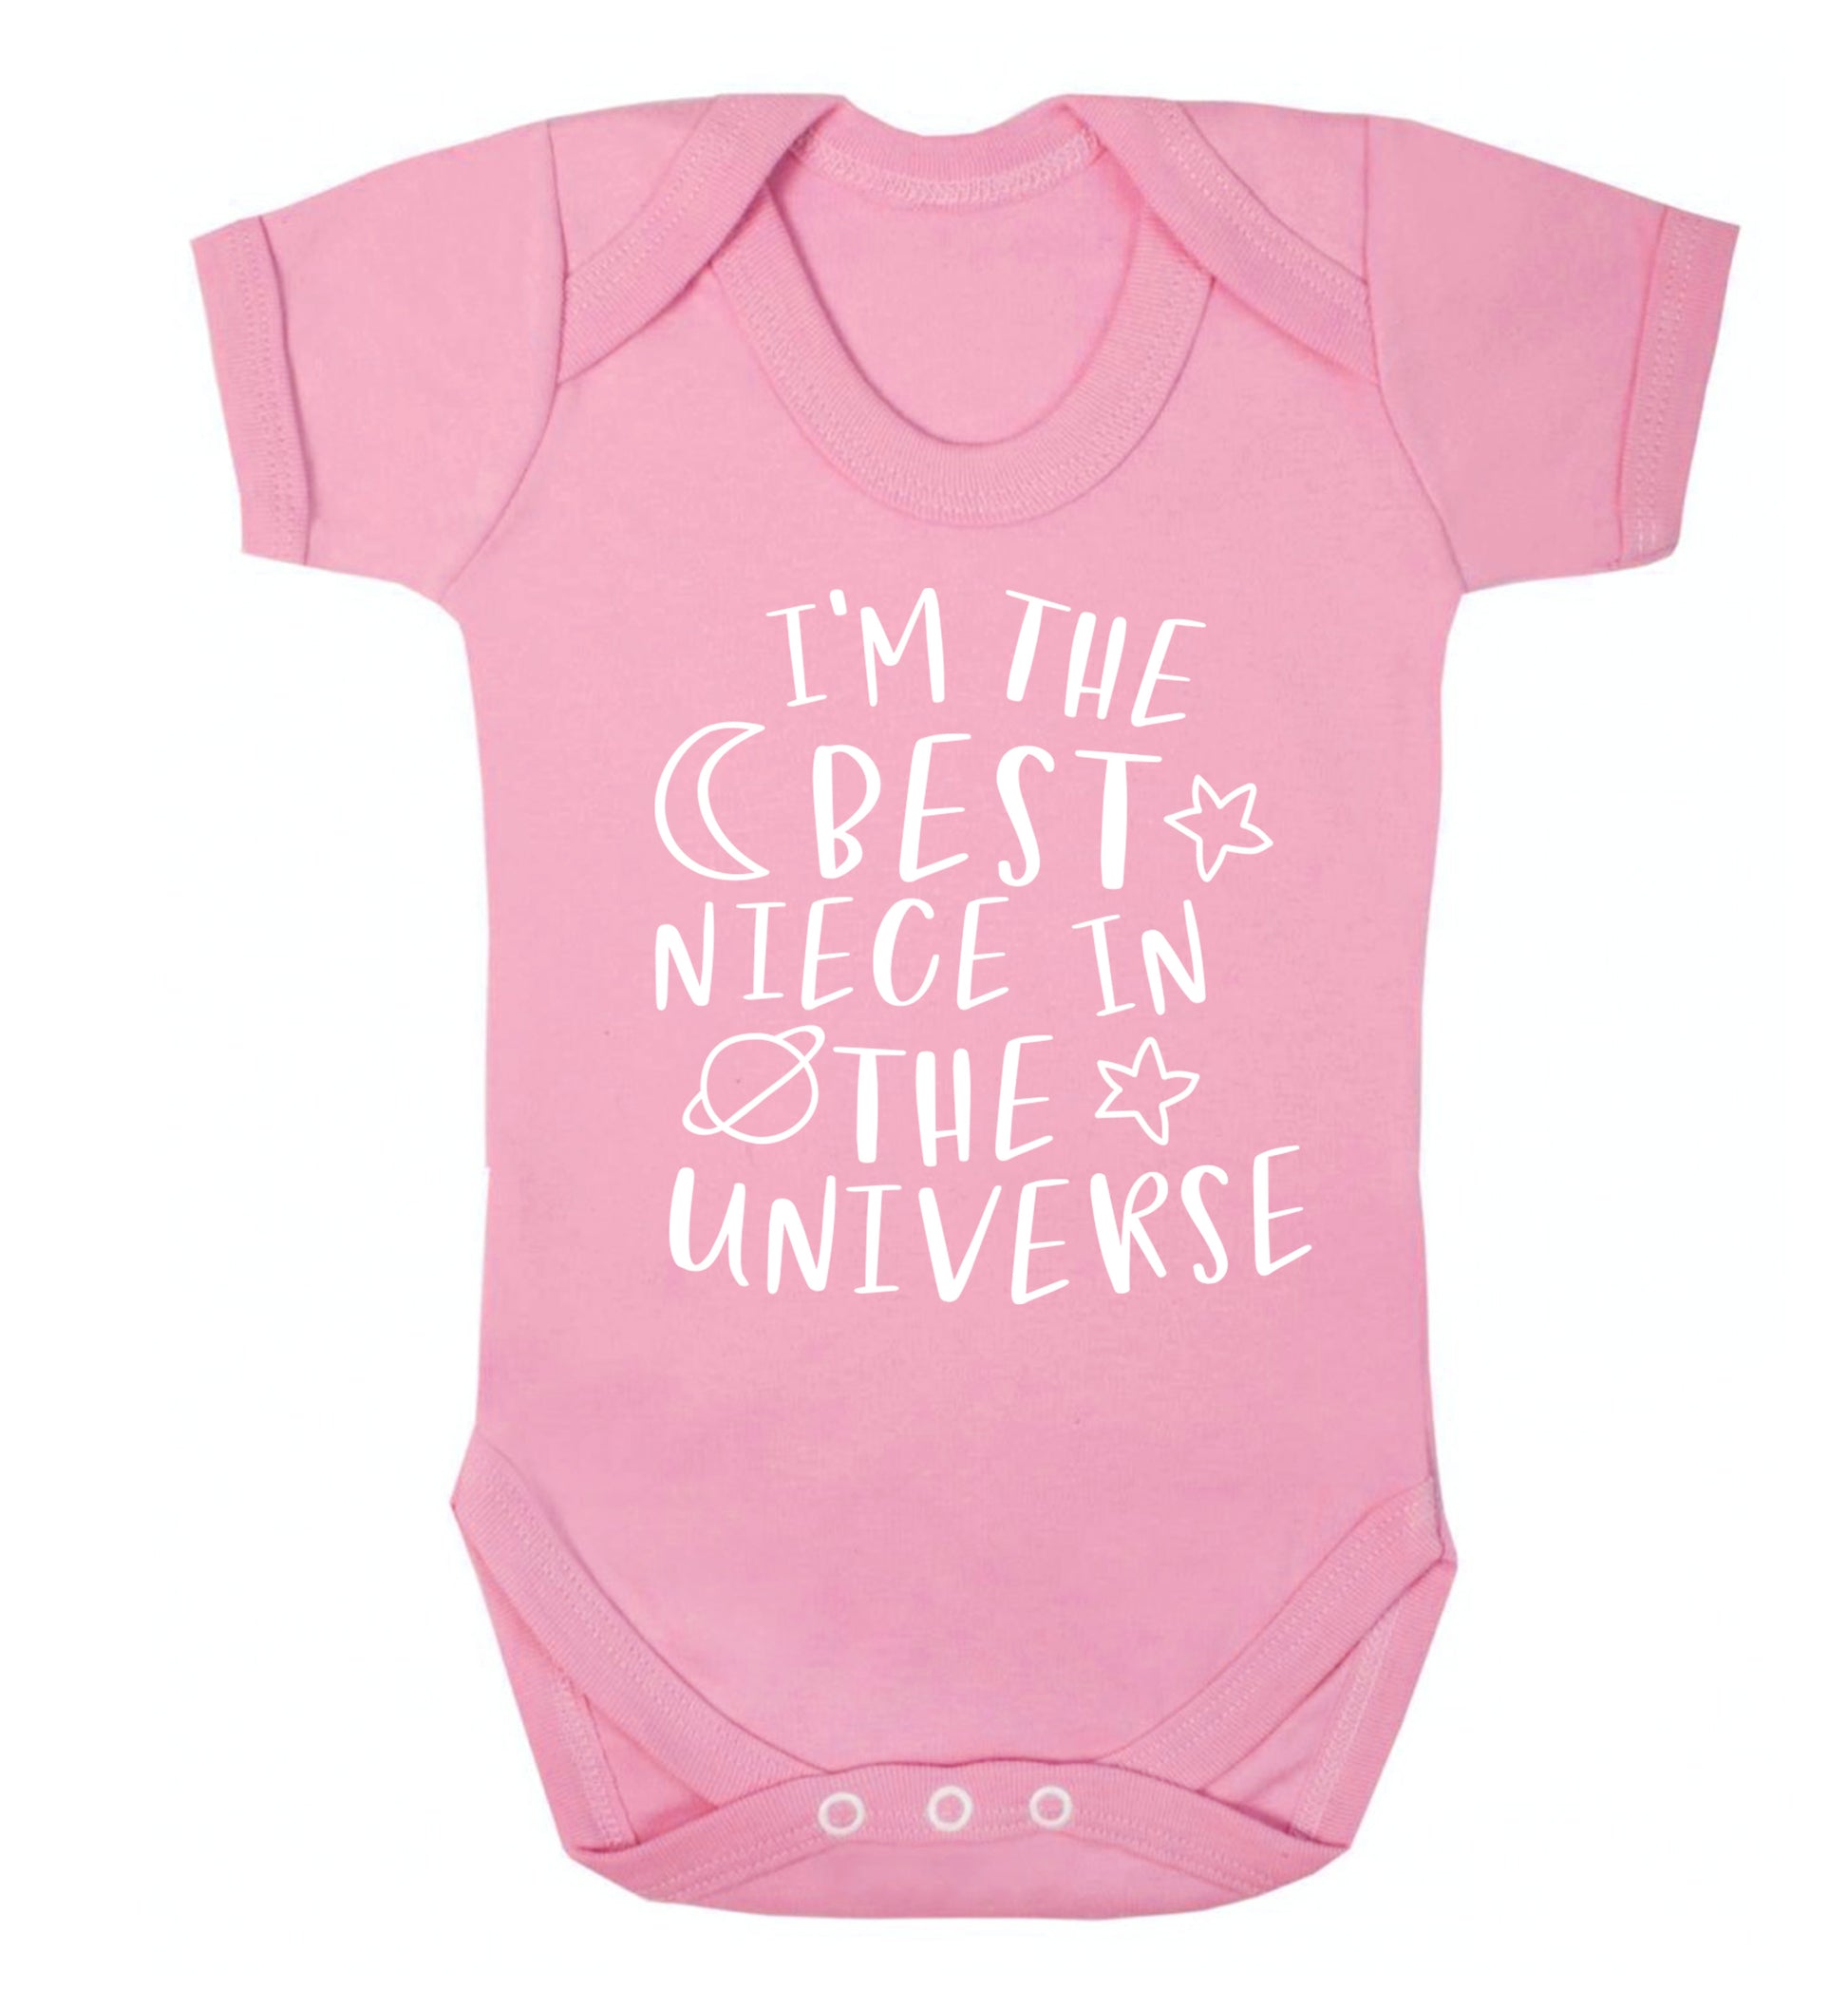 I'm the best niece in the universe Baby Vest pale pink 18-24 months